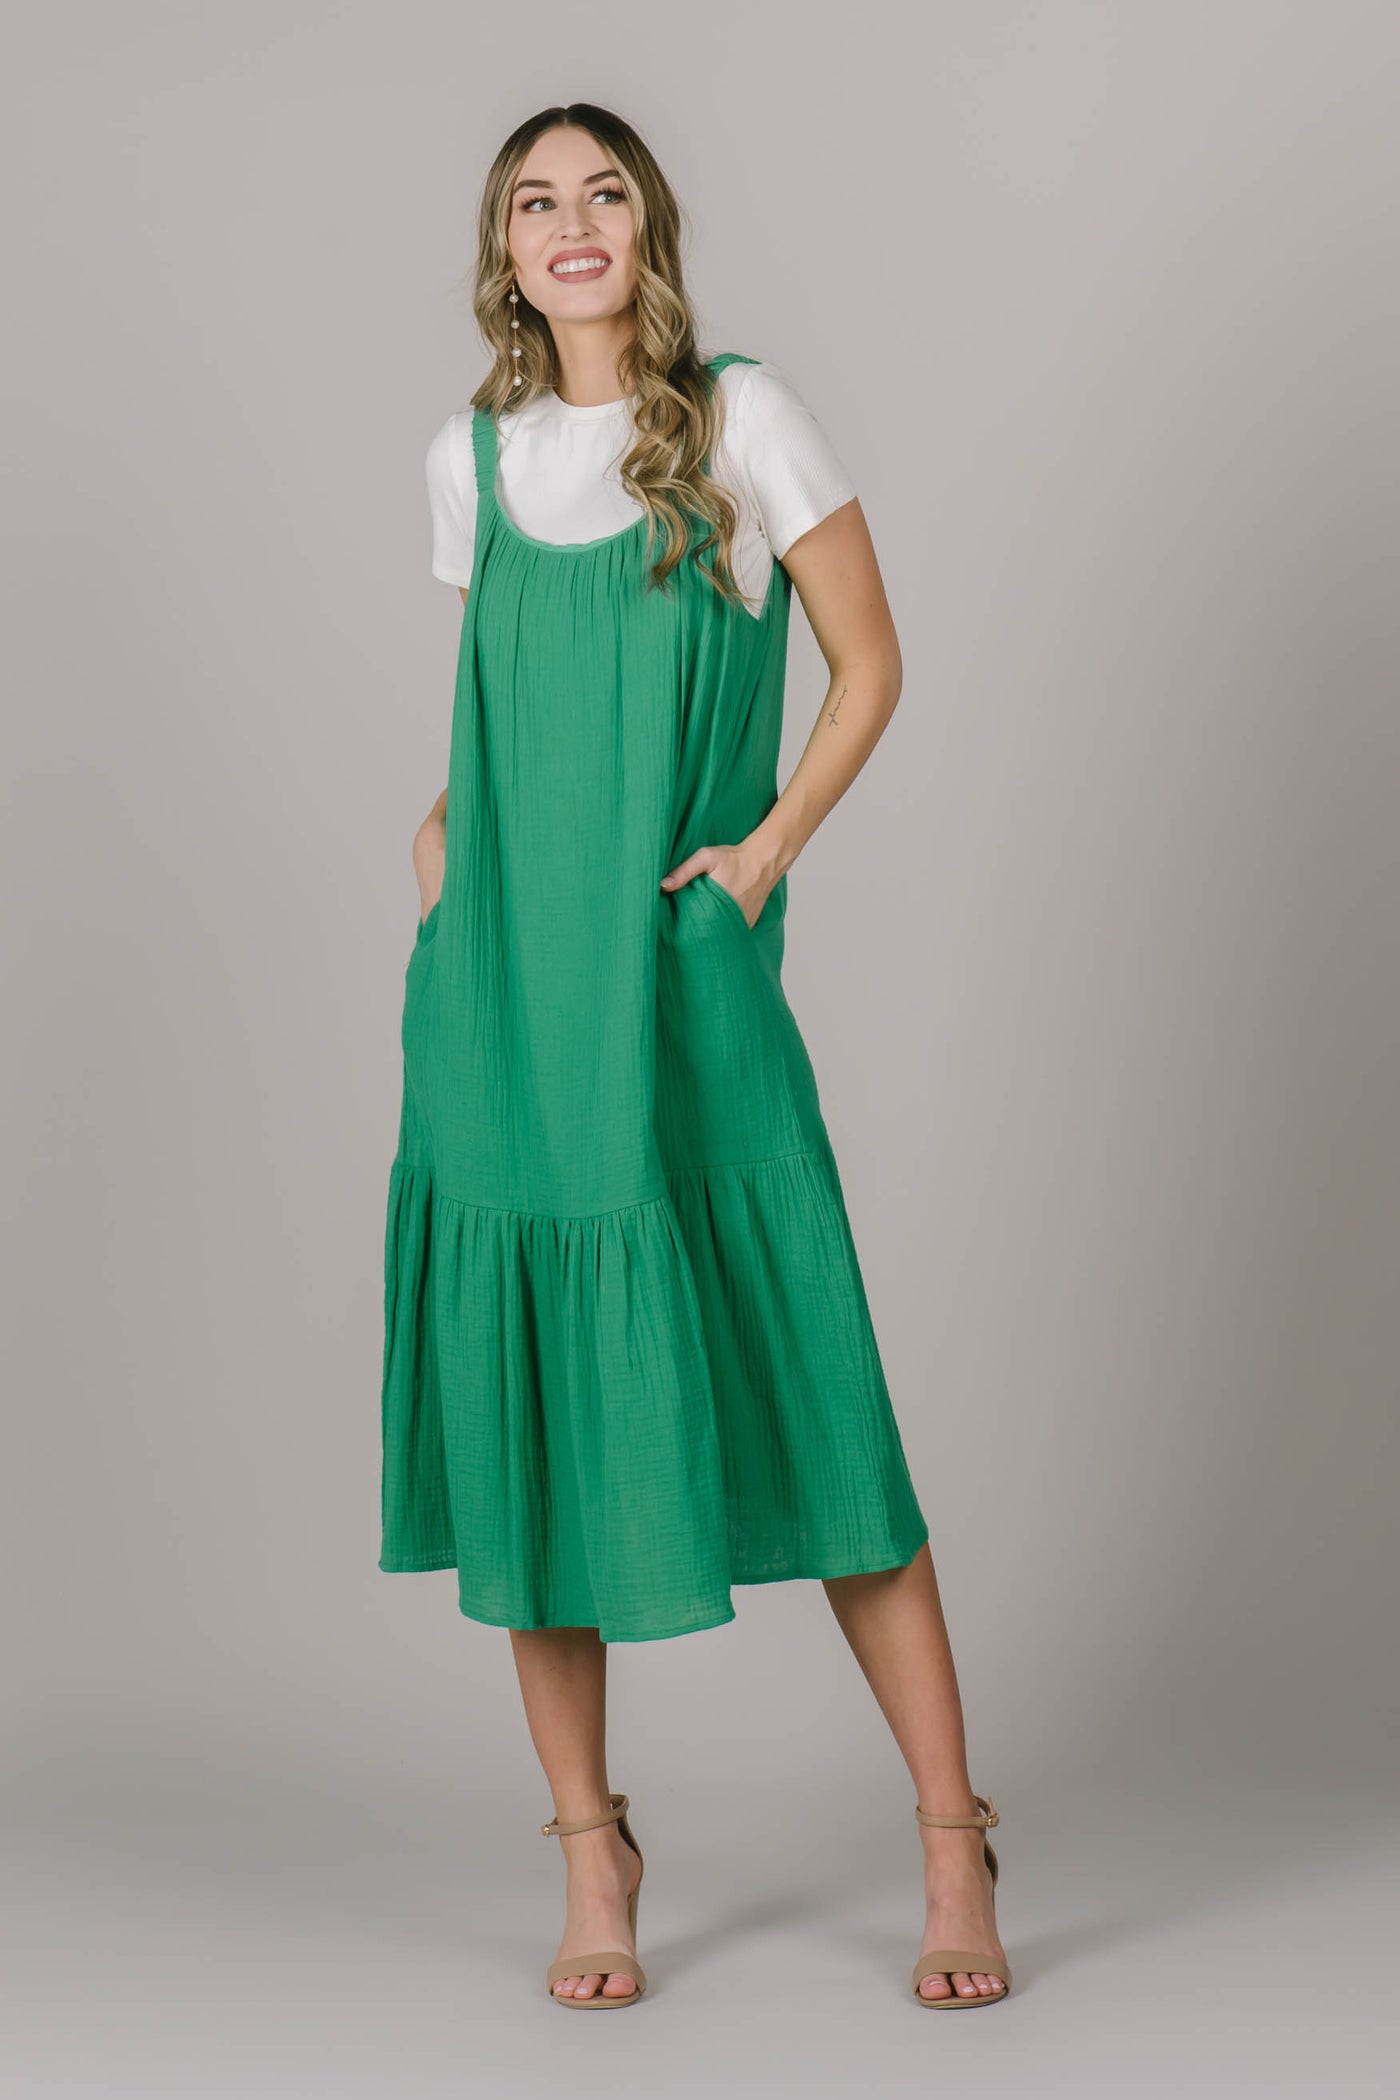 Modest dress in Utah in a cute green color perfect for spring/ summer, a light flowy feel, and perfect for wearing over a t shirt.